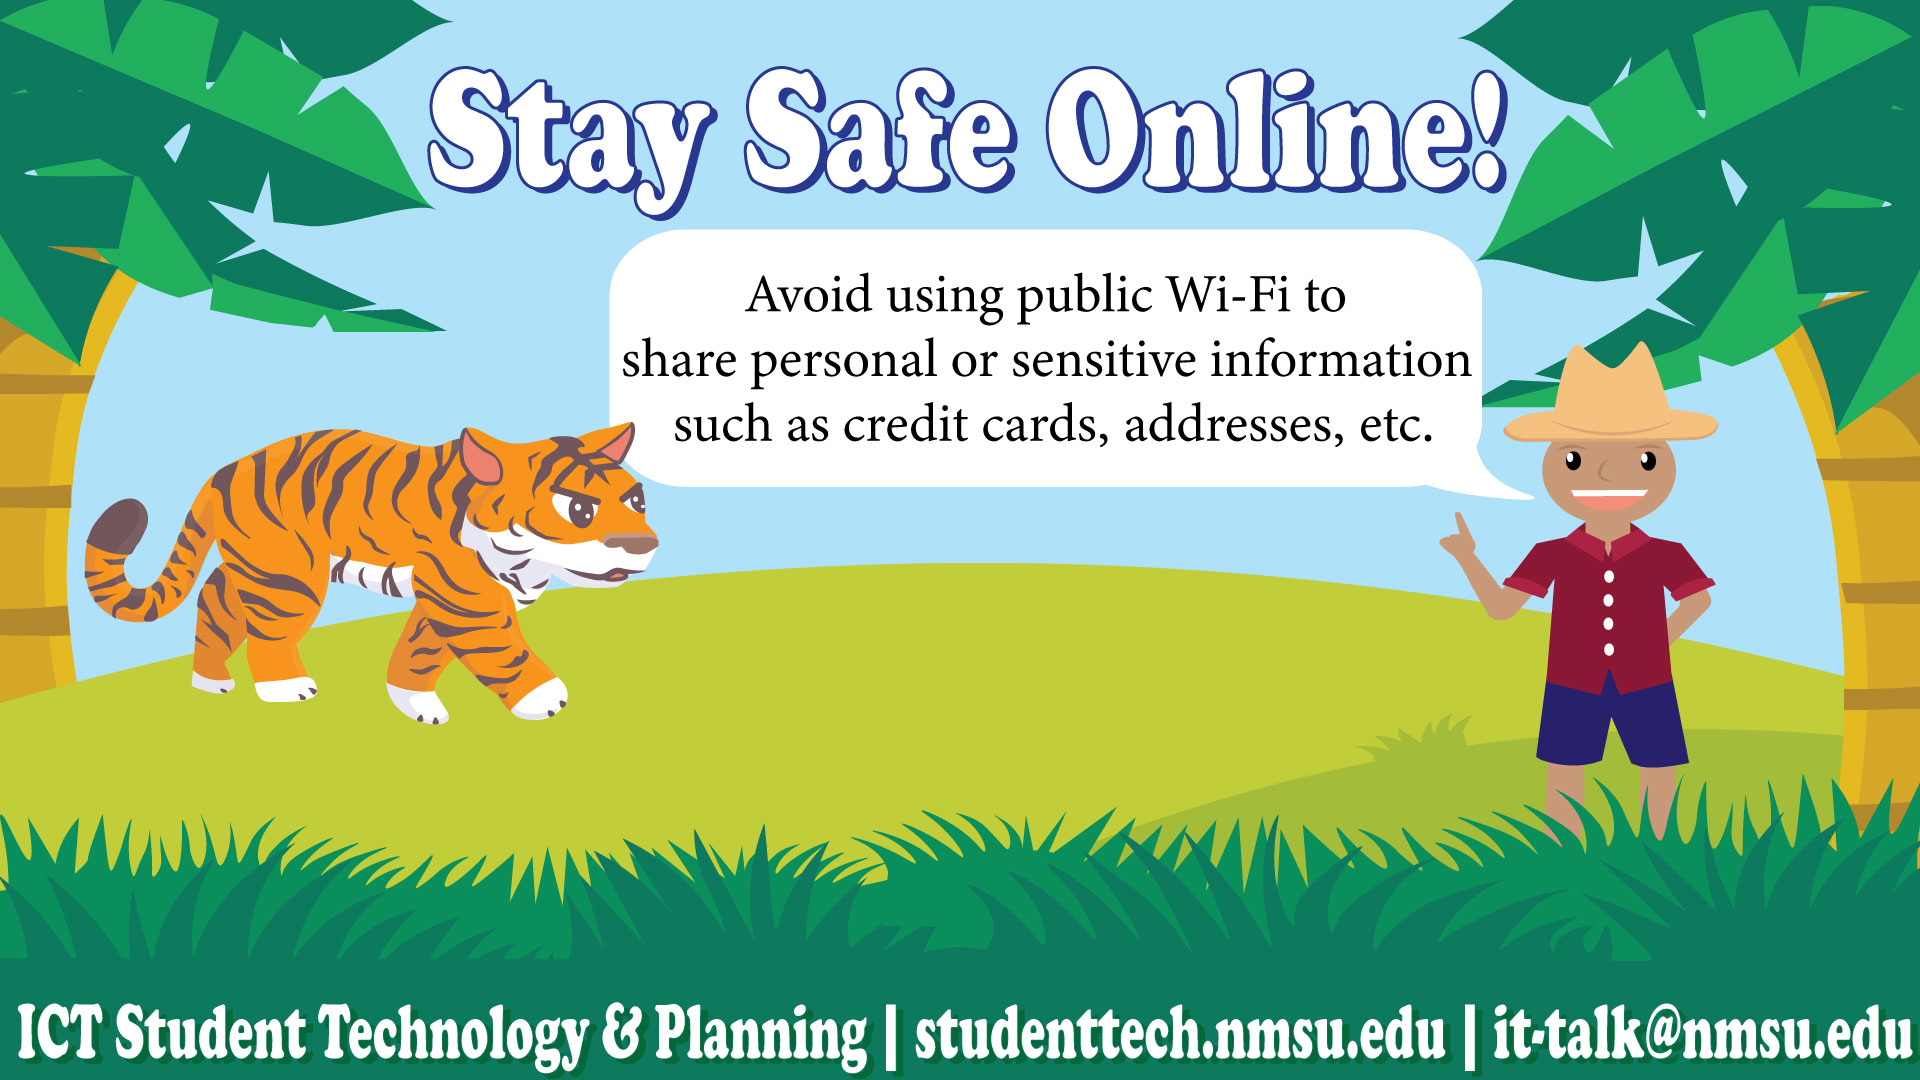 Stay safe online! Avoid using publici Wi-Fi to share personal or sensitive information such as credit cards, addresses, etc.